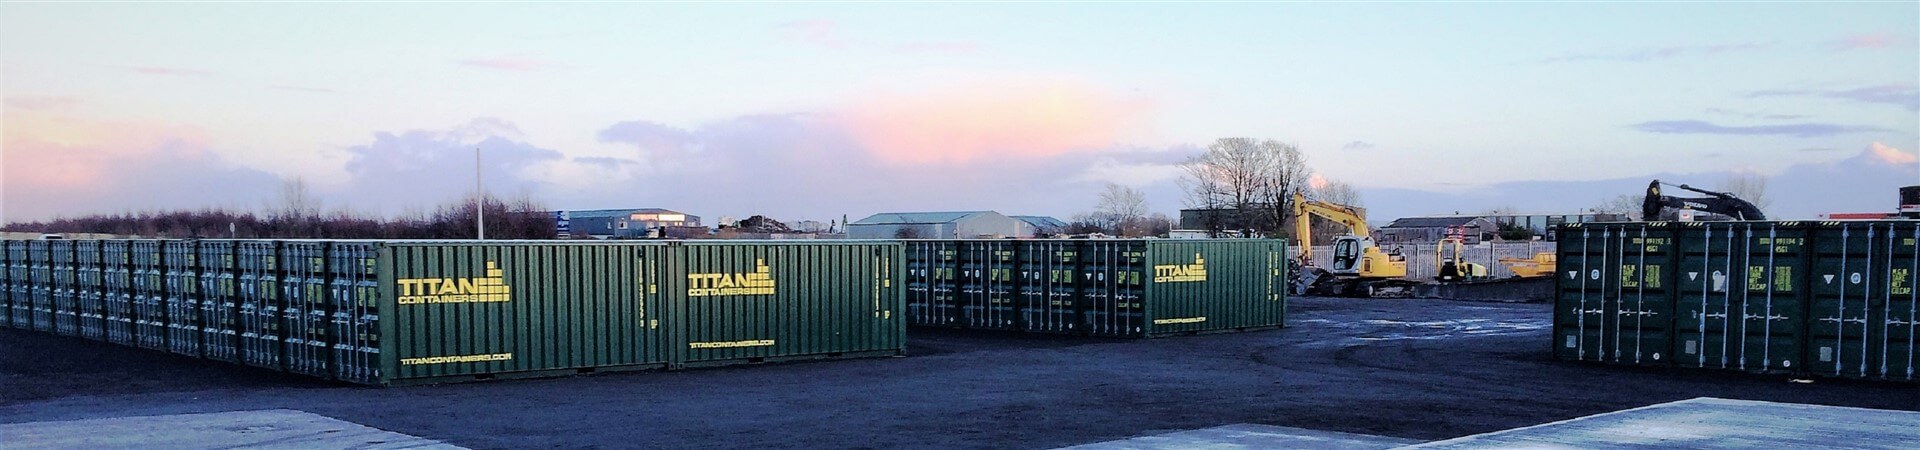 Galway Self Storage container site